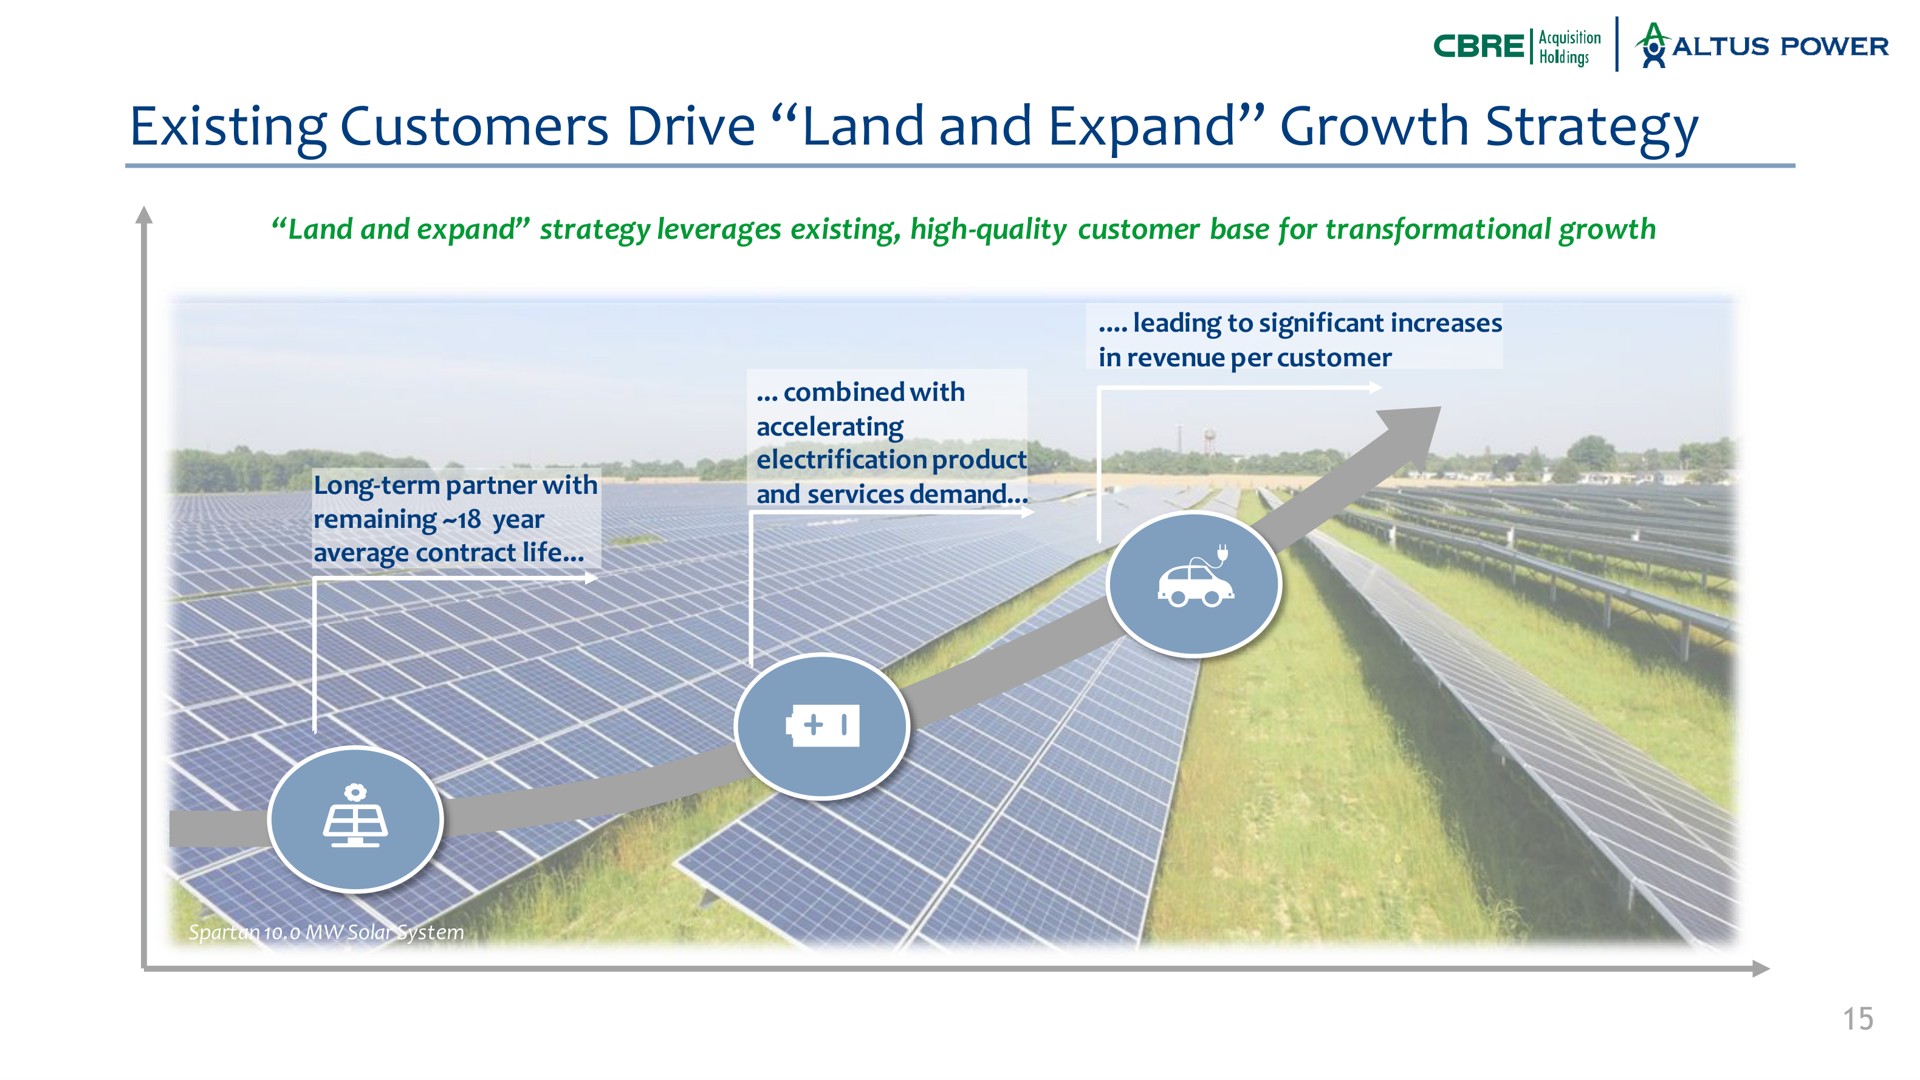 existing customers drive land and expand growth strategy leverages high quality customer base for power leading to significant increases combined with accelerating ion long term partner with remaining year ife product eerie services demand aes | Altus Power